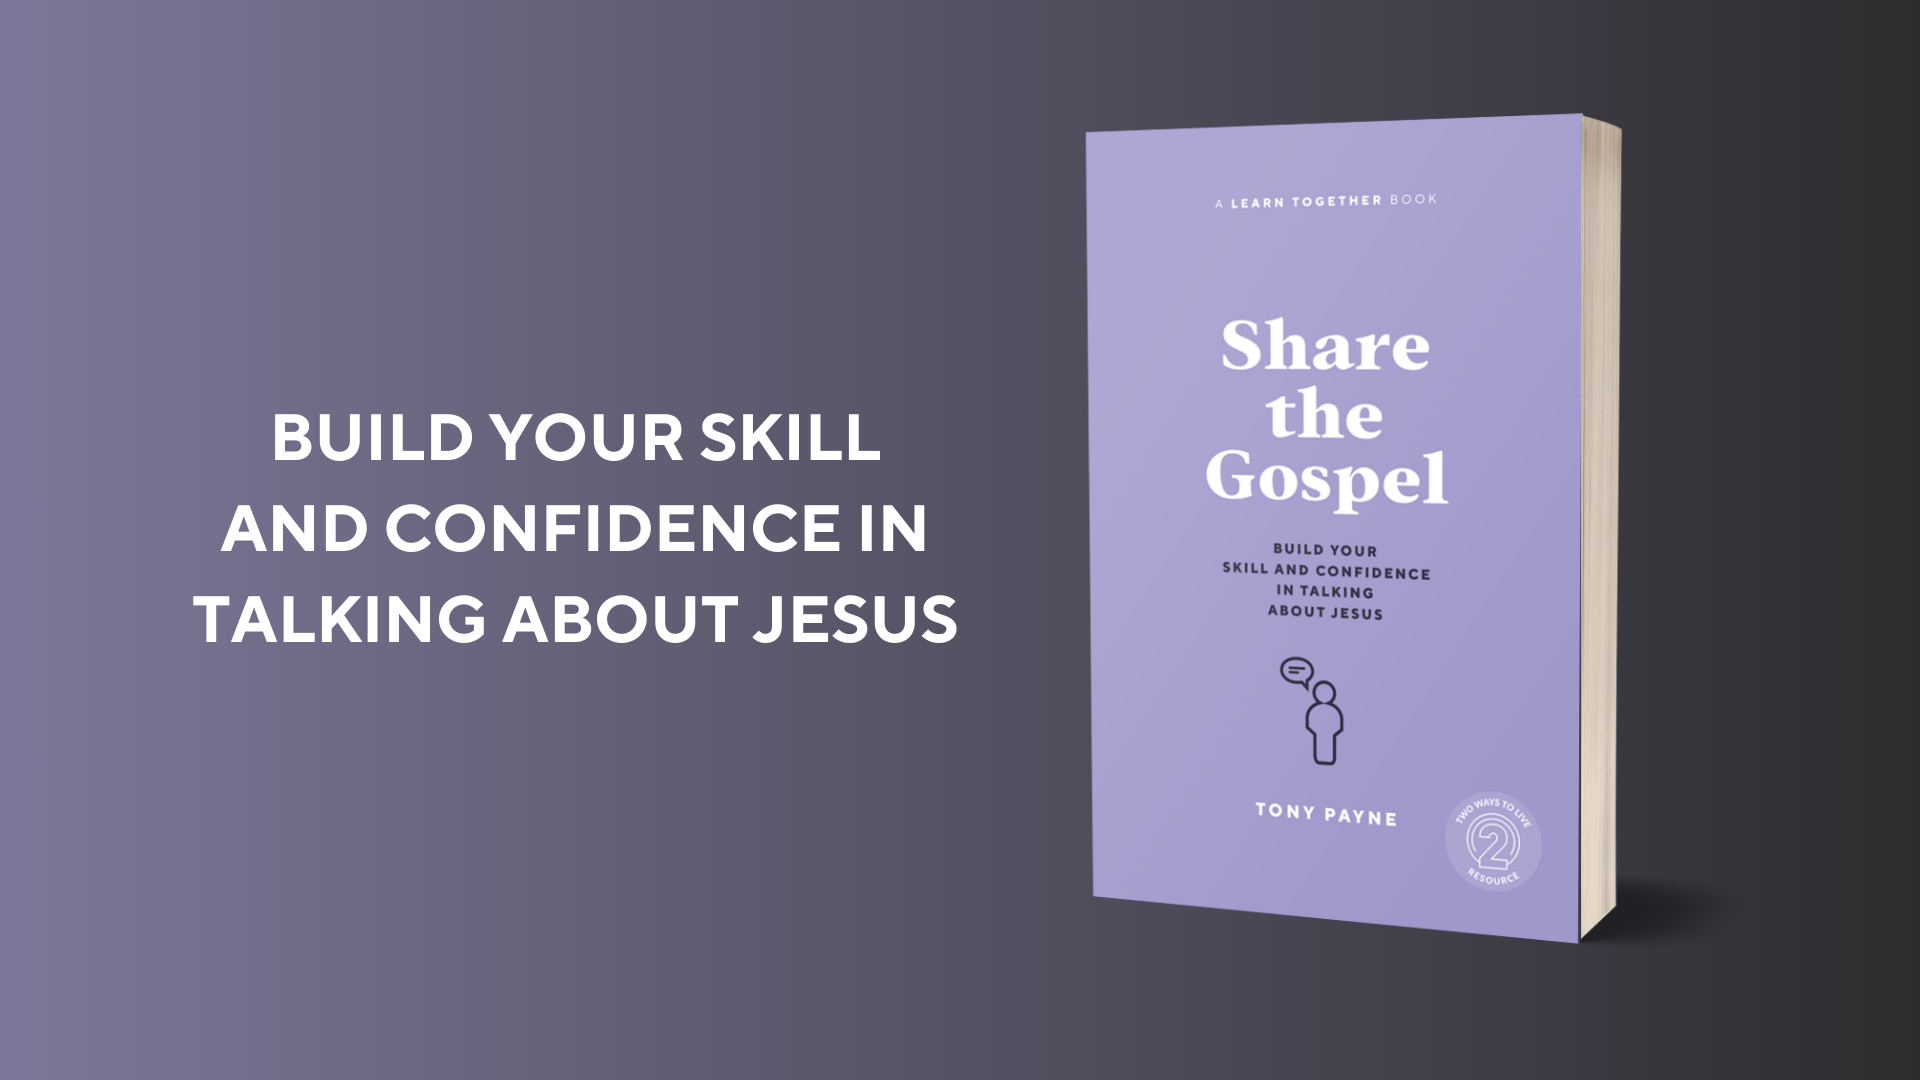 Share the Gospel build your skill and confidence in talking about Jesus